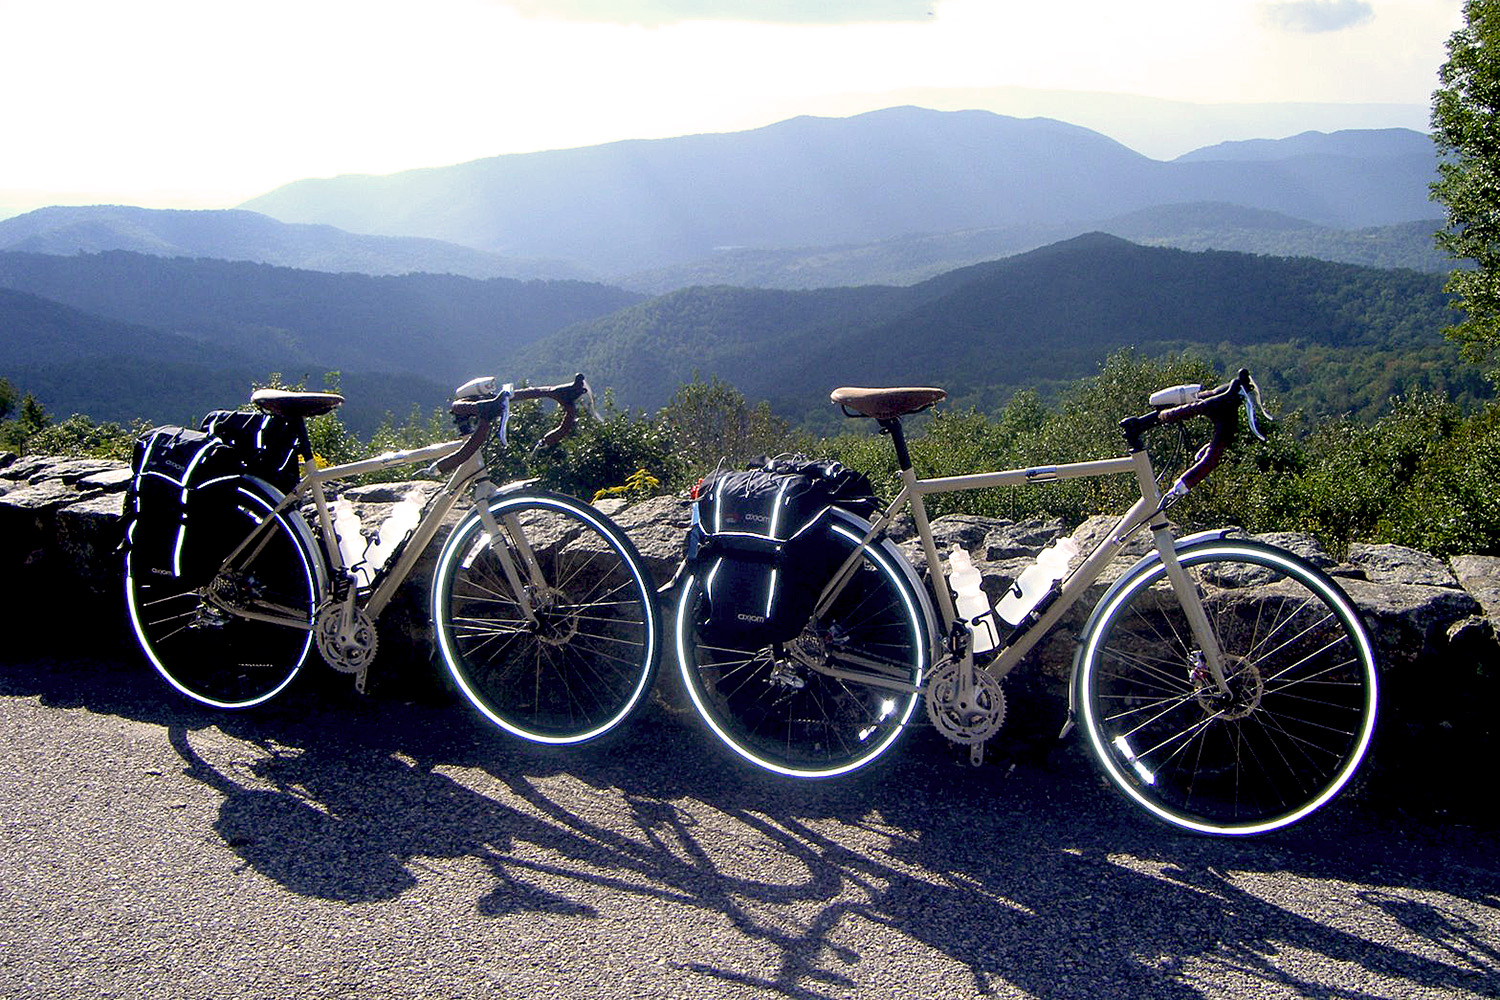 Two loaded touring bicycles leaning against a wall with mountains in the background